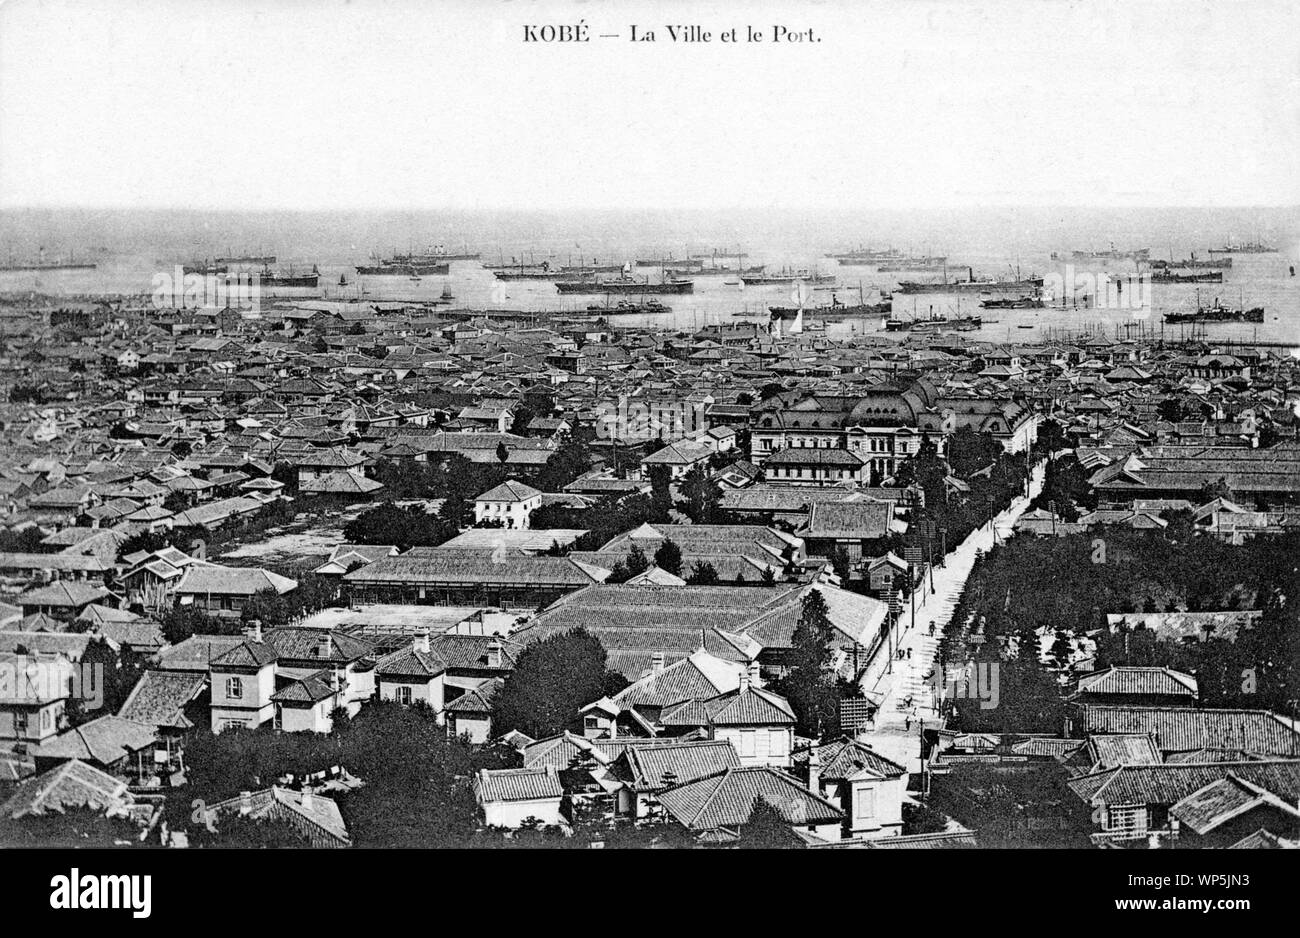 [ 1900s Japan - Panoramic View on Kobe ] —   Panoramic View on Kobe. The big square building right off the middle is Hyogo Prefectural Office, completed in 1902. The harbor is crowded with steamers.  This postcard is from a series of French cards shot sometime between 1902 and 1907.  20th century vintage postcard. Stock Photo